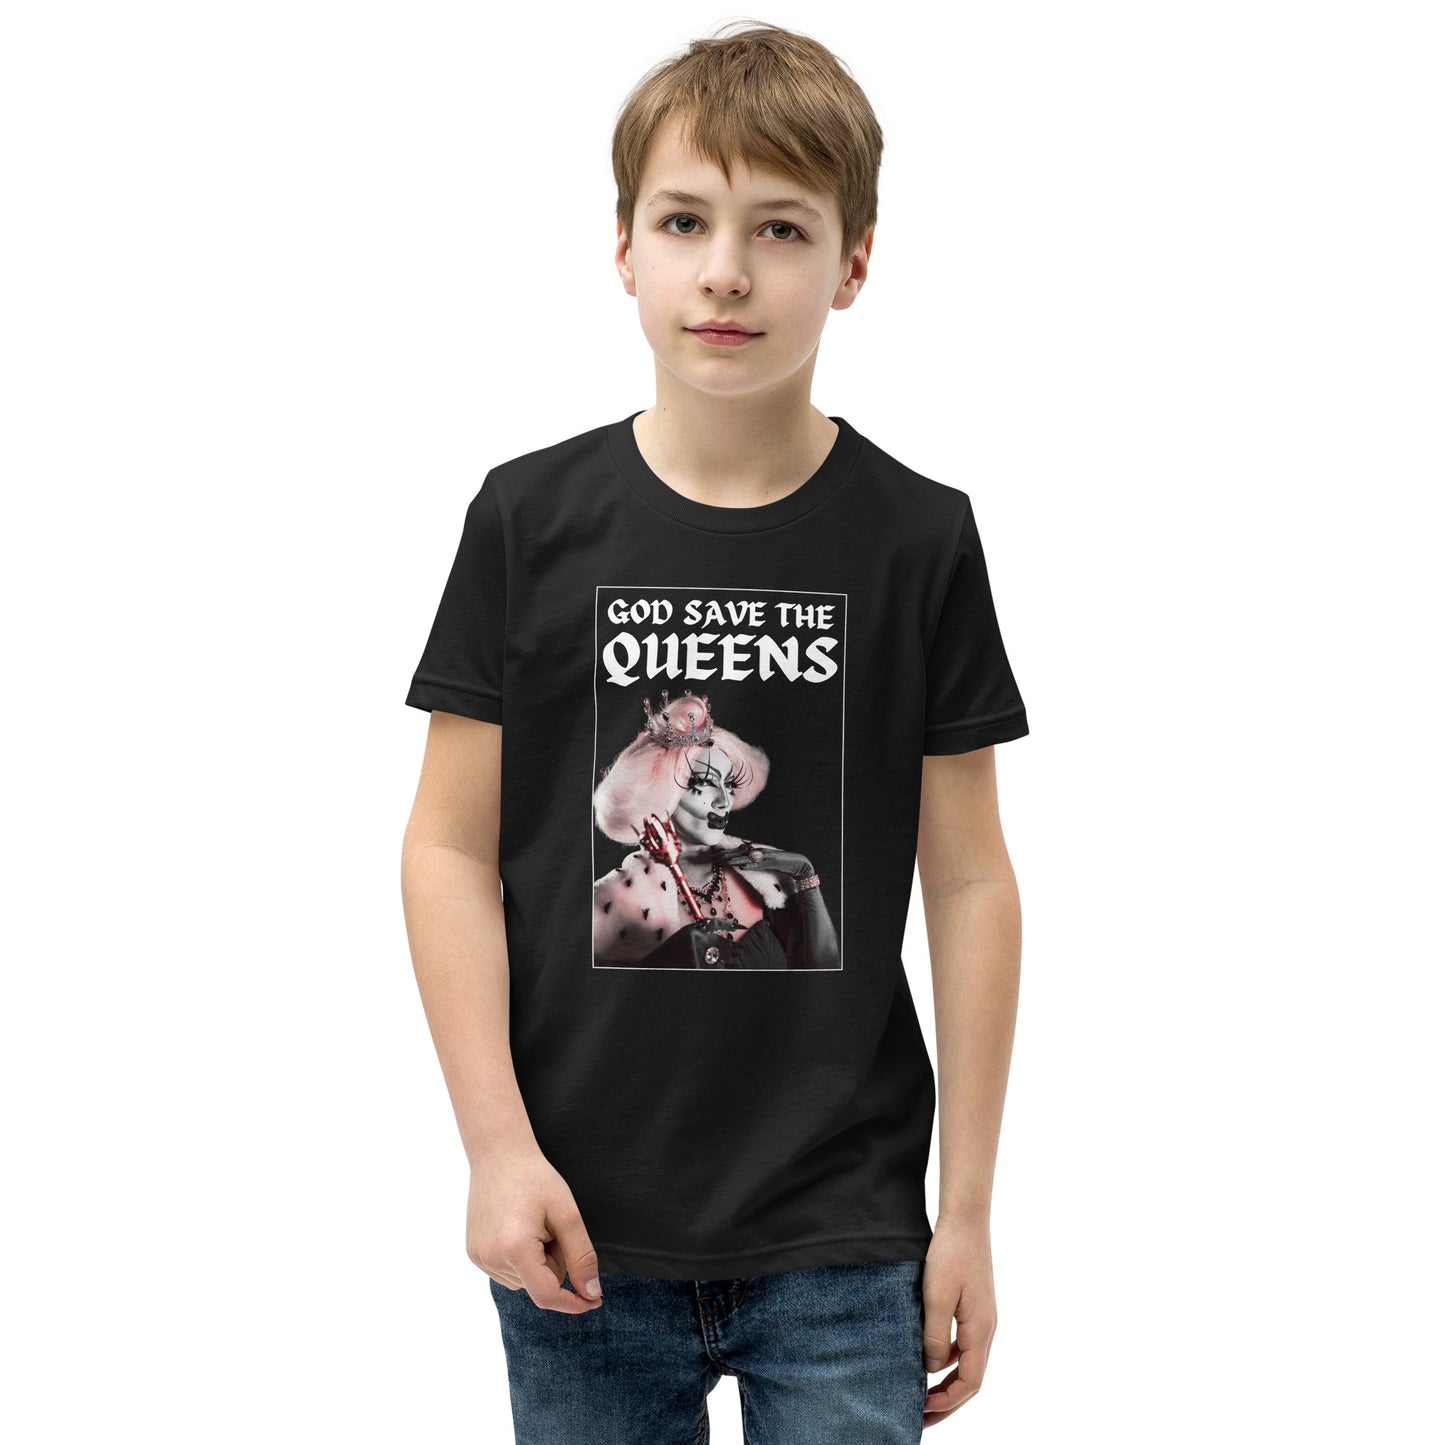 God Save the Queens Youth Tee - Dark Colors